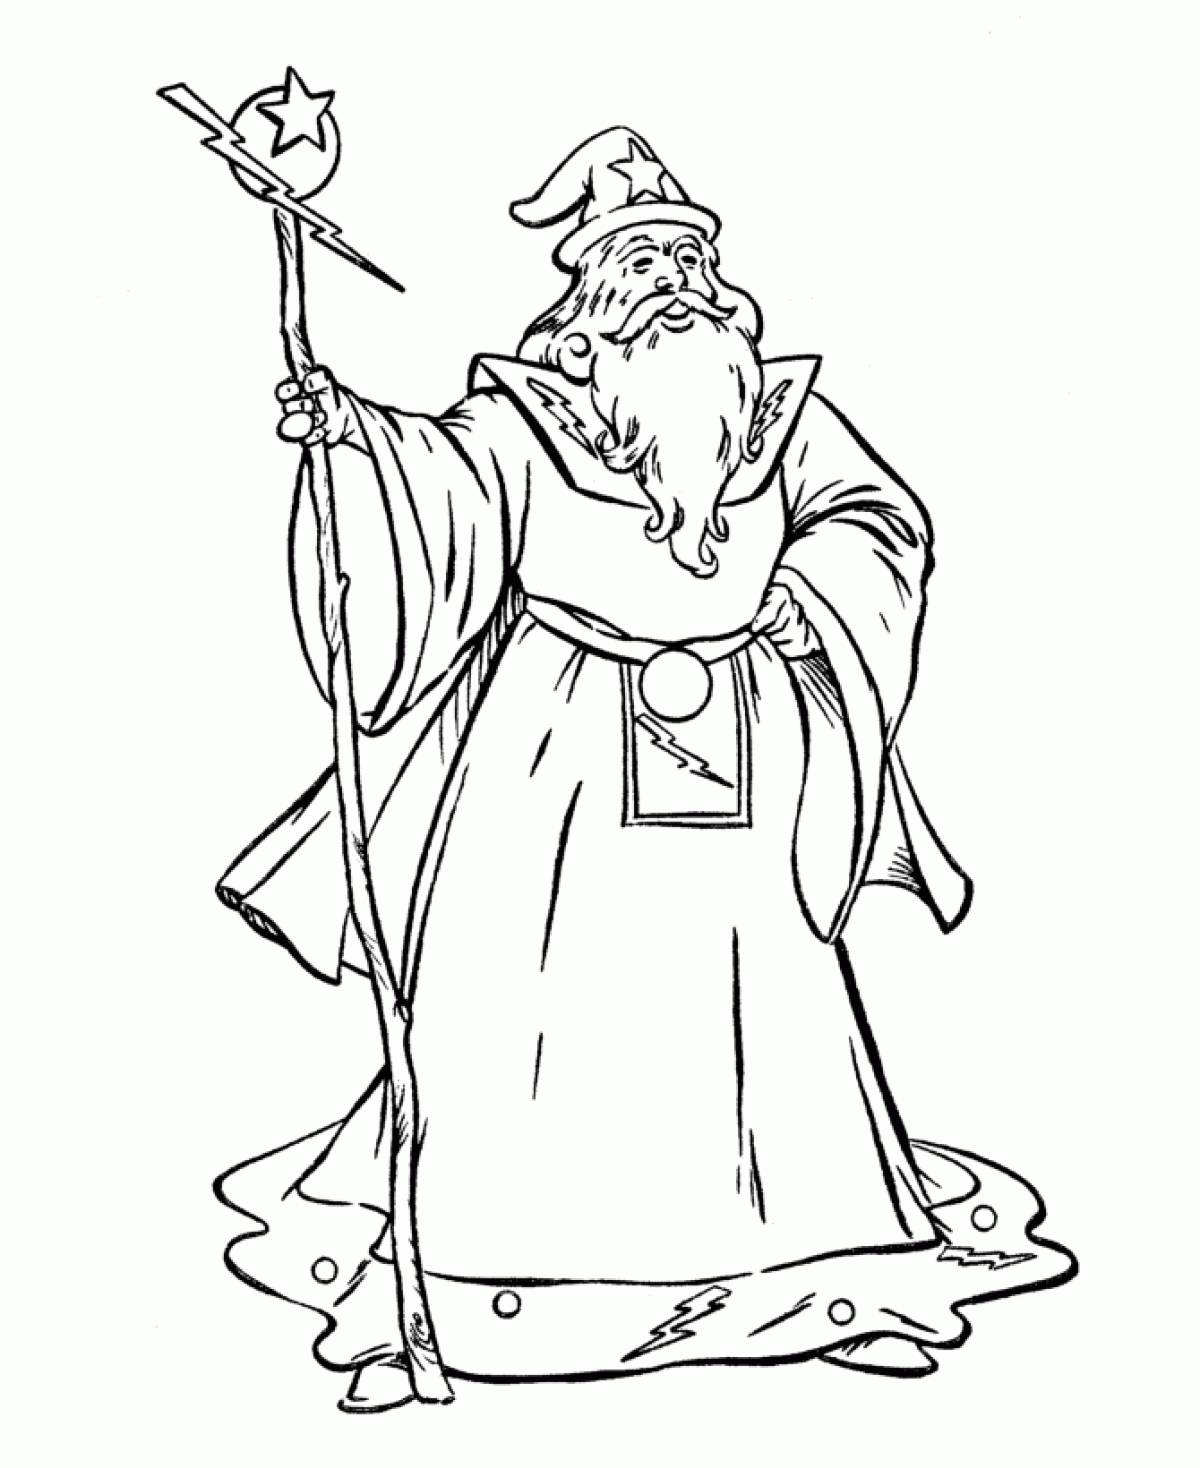 Wizard with staff